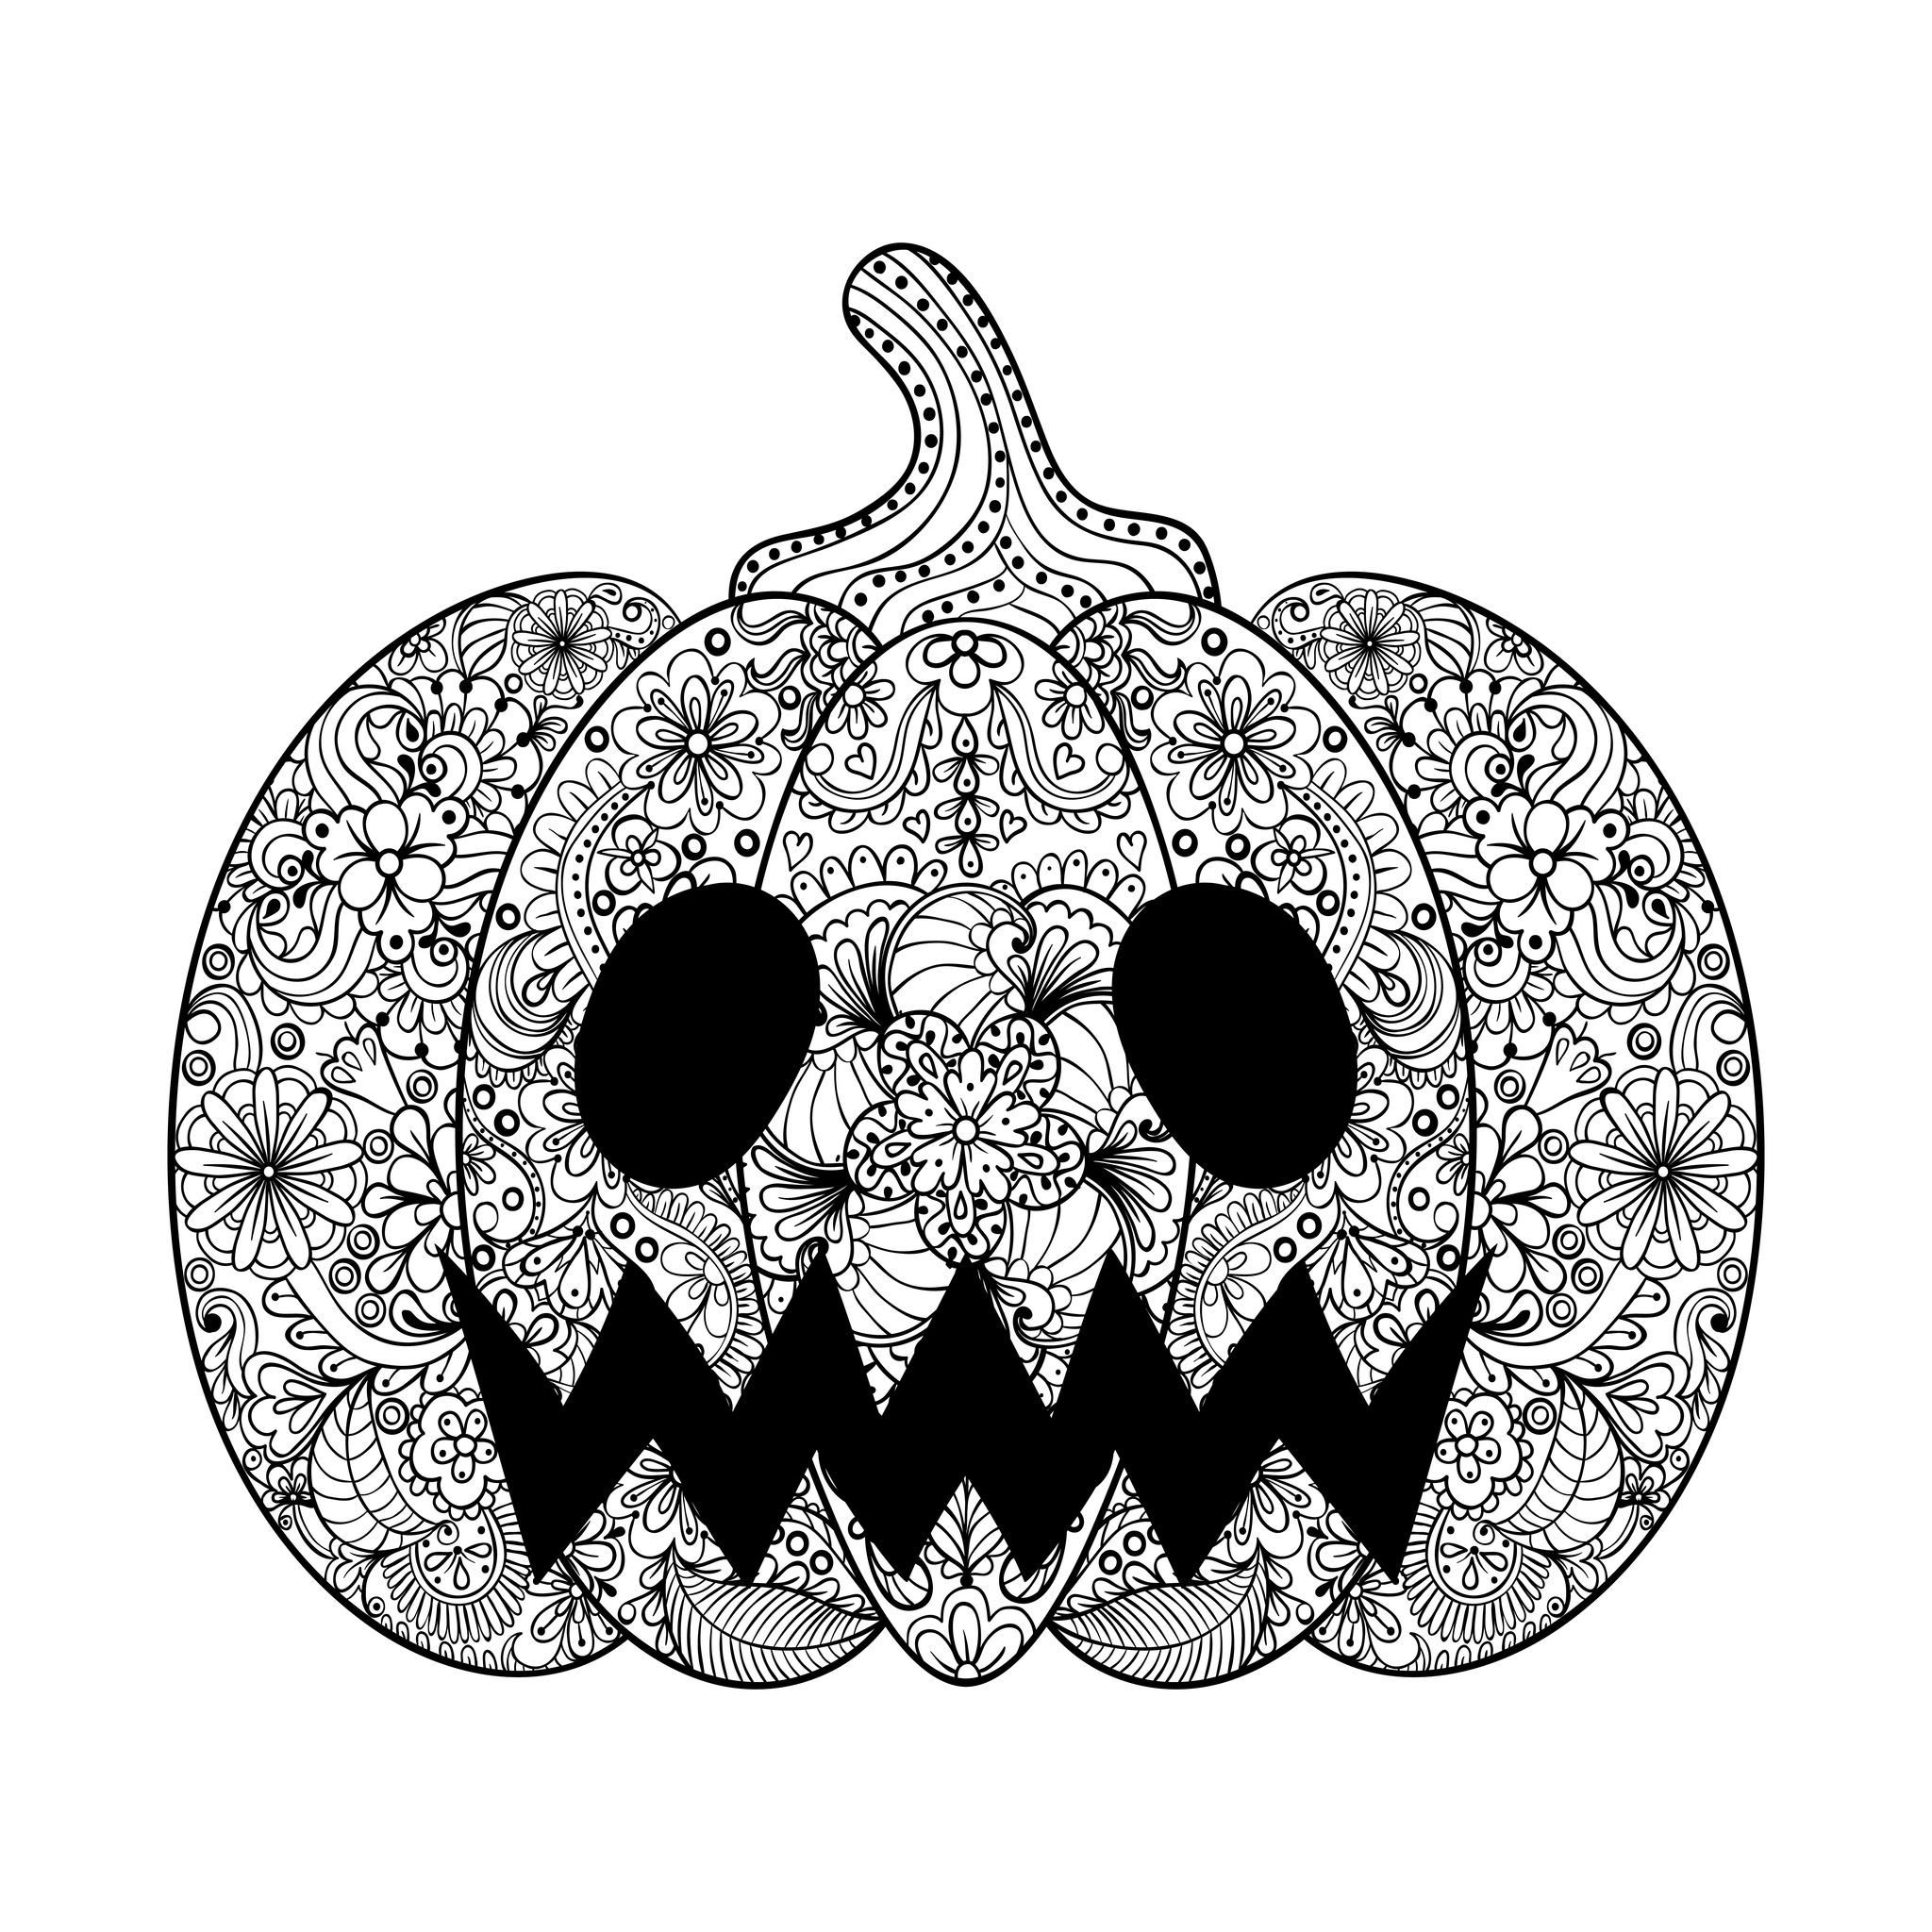 Halloween Scary Pumpkin Halloween Adult Coloring Pages